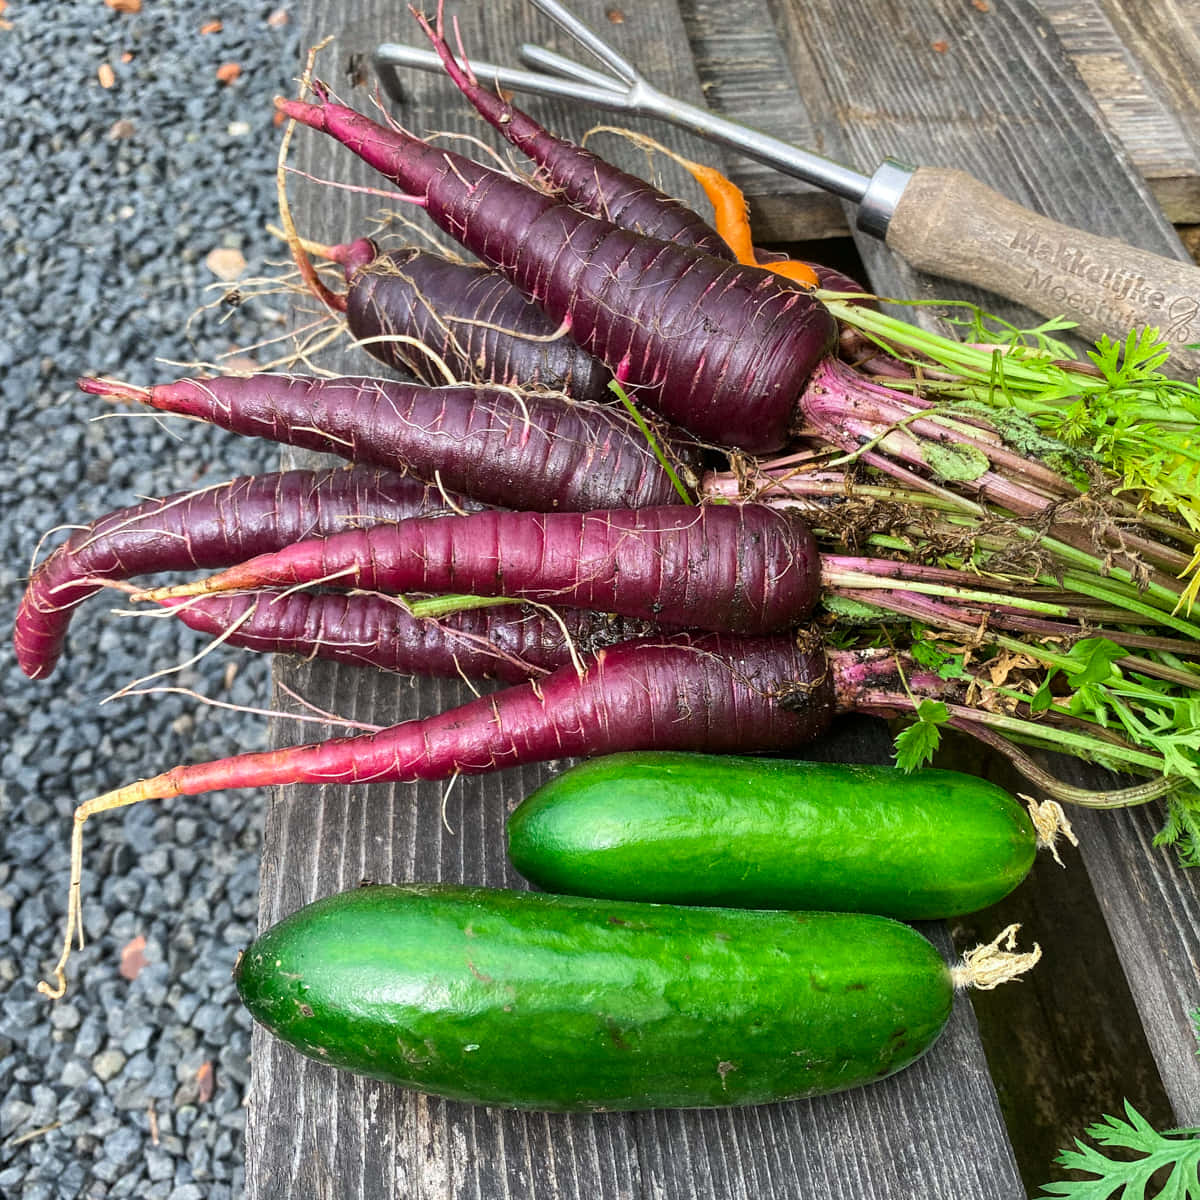 Nourishing and antioxidant-packed: Enjoy the unique taste of Purple Carrots! Wallpaper